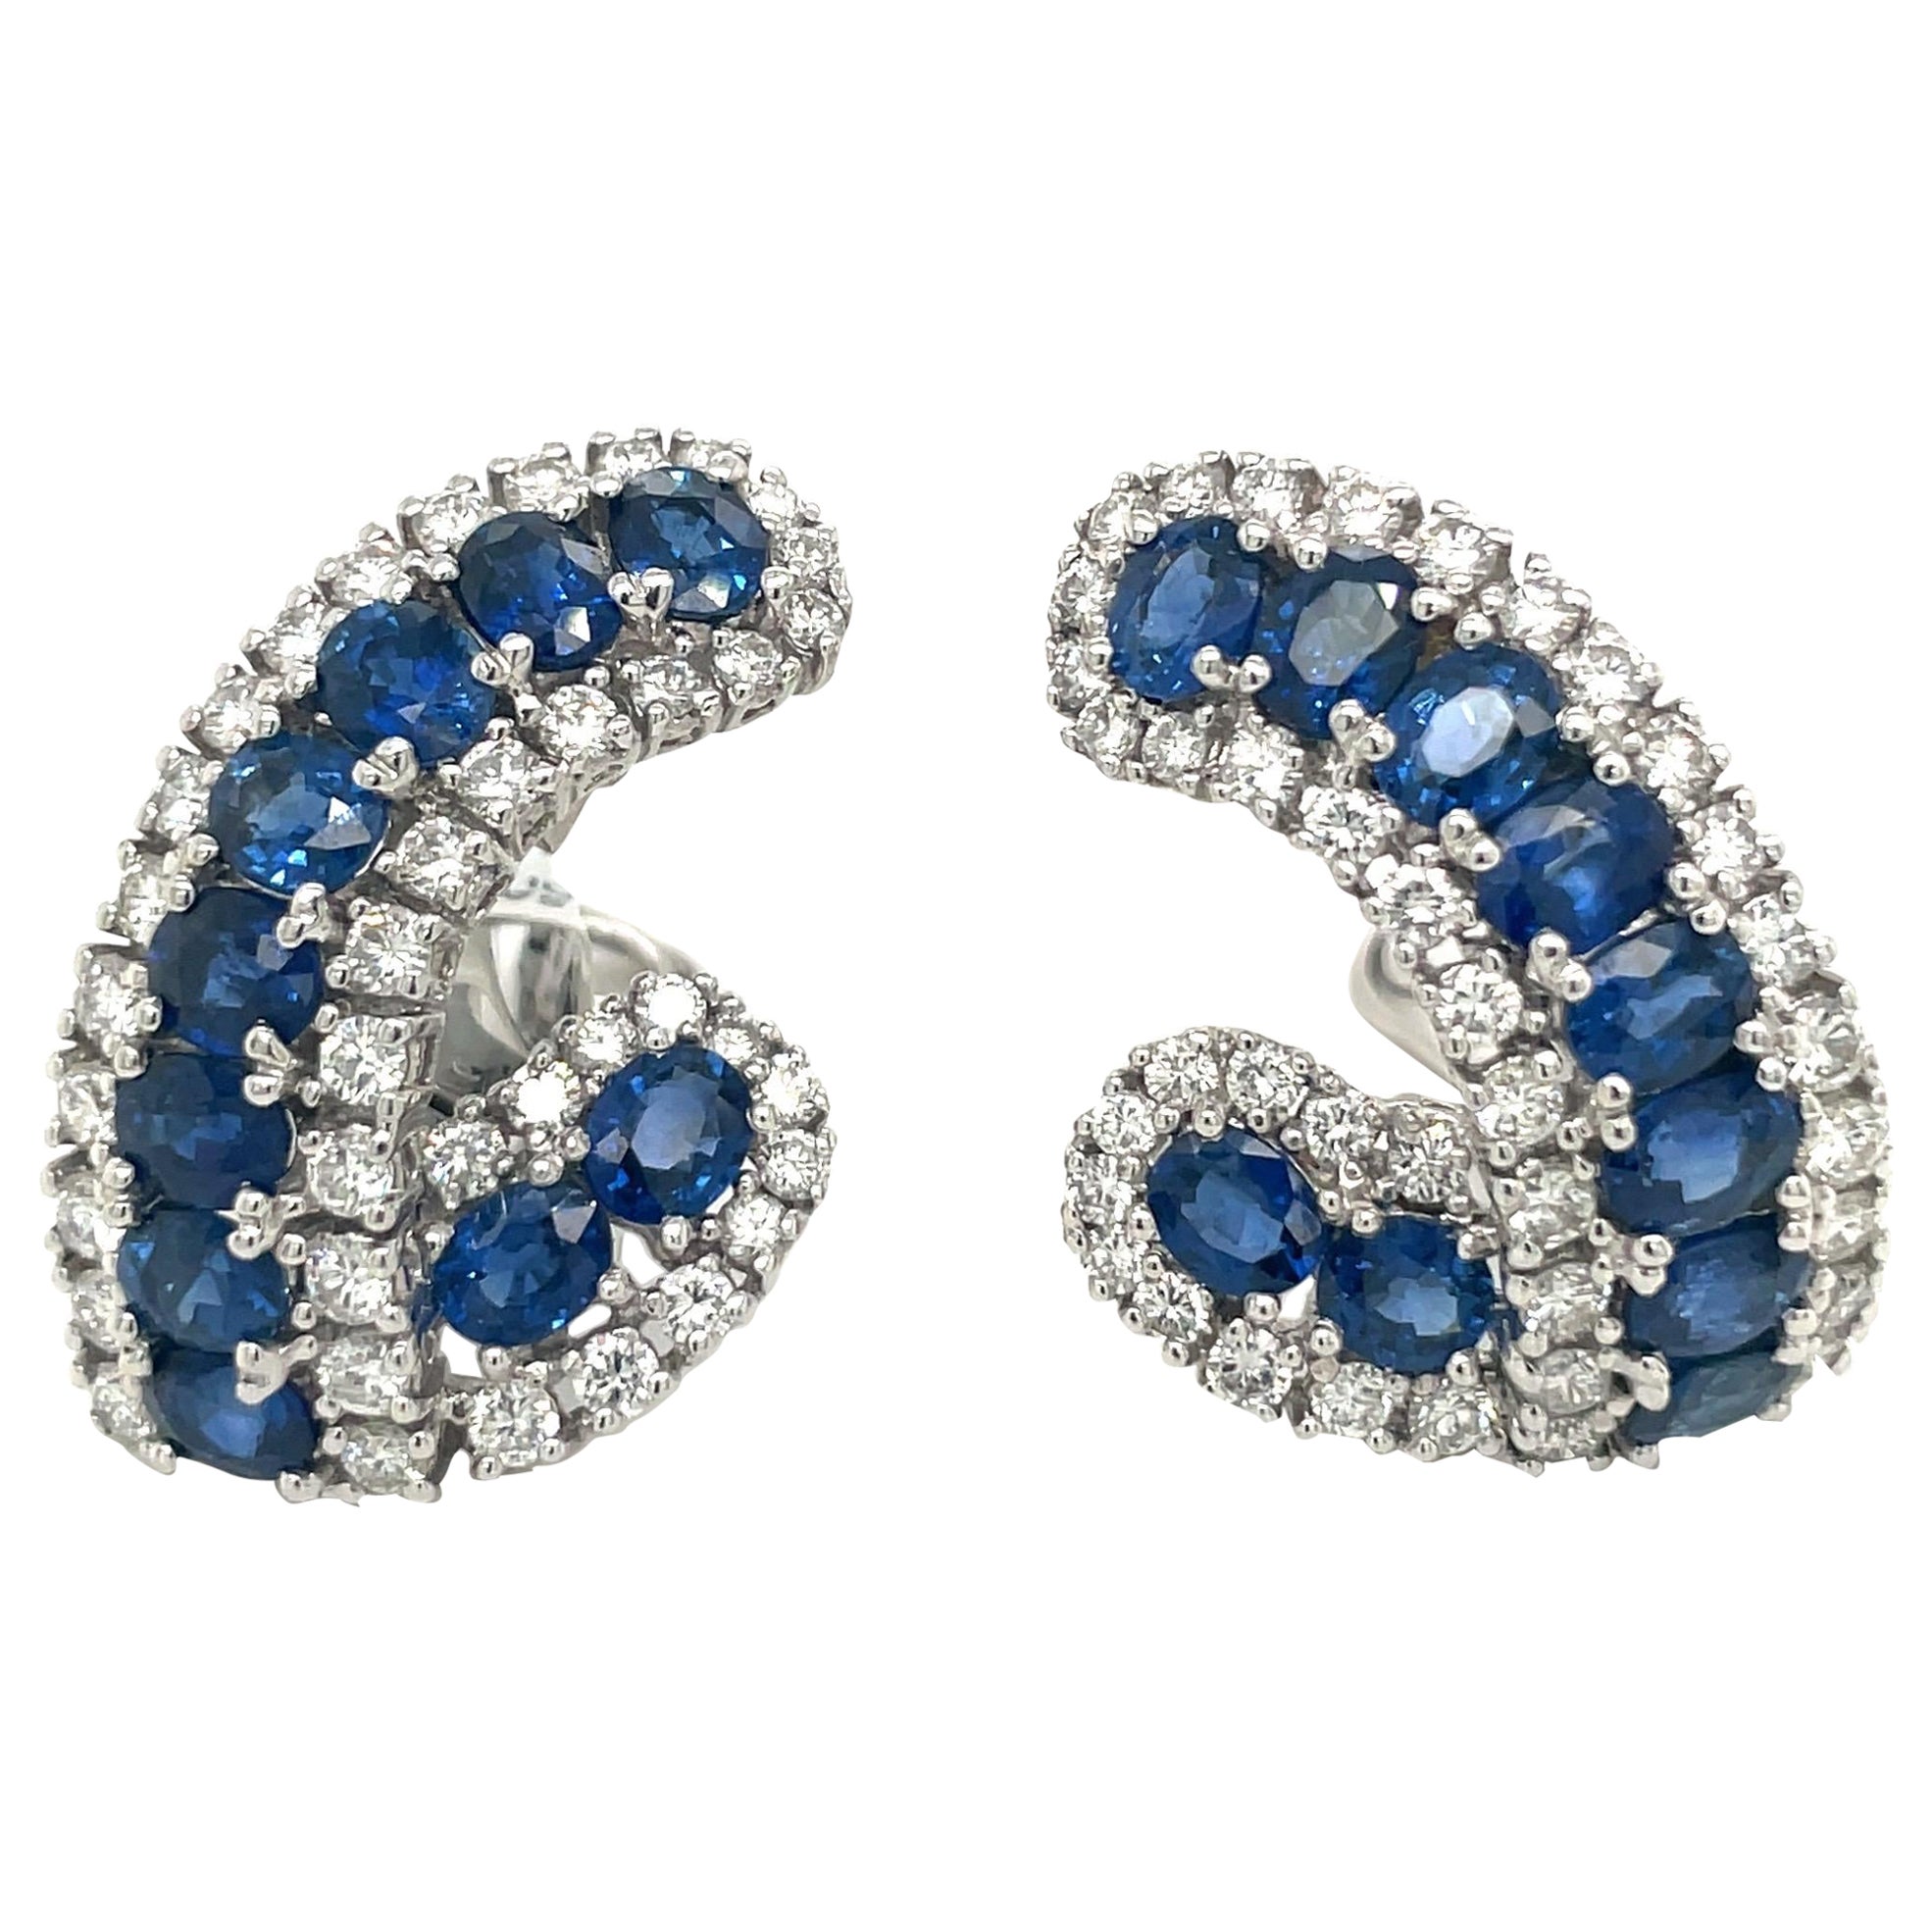 18KT White Gold 9.38Ct Blue Sapphire 2.97Ct. Diamond Earrings For Sale